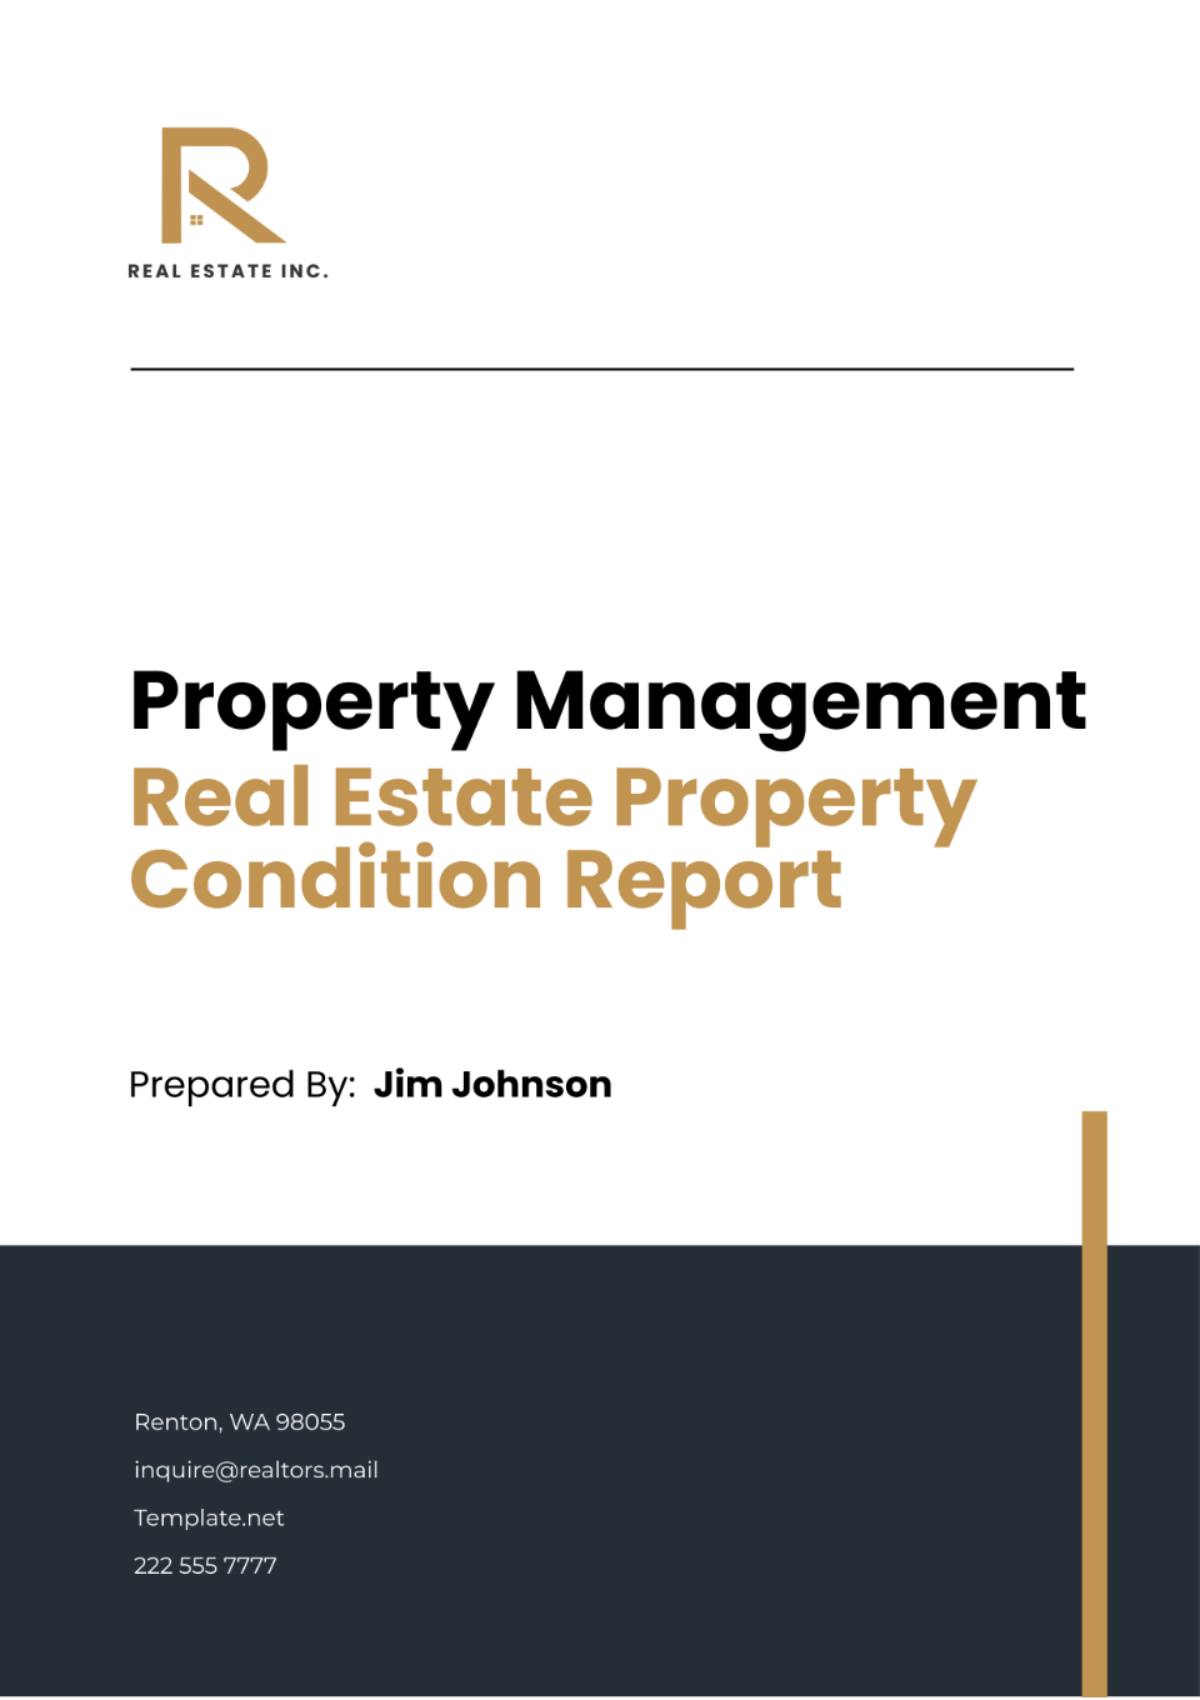 Real Estate Property Condition Report Template